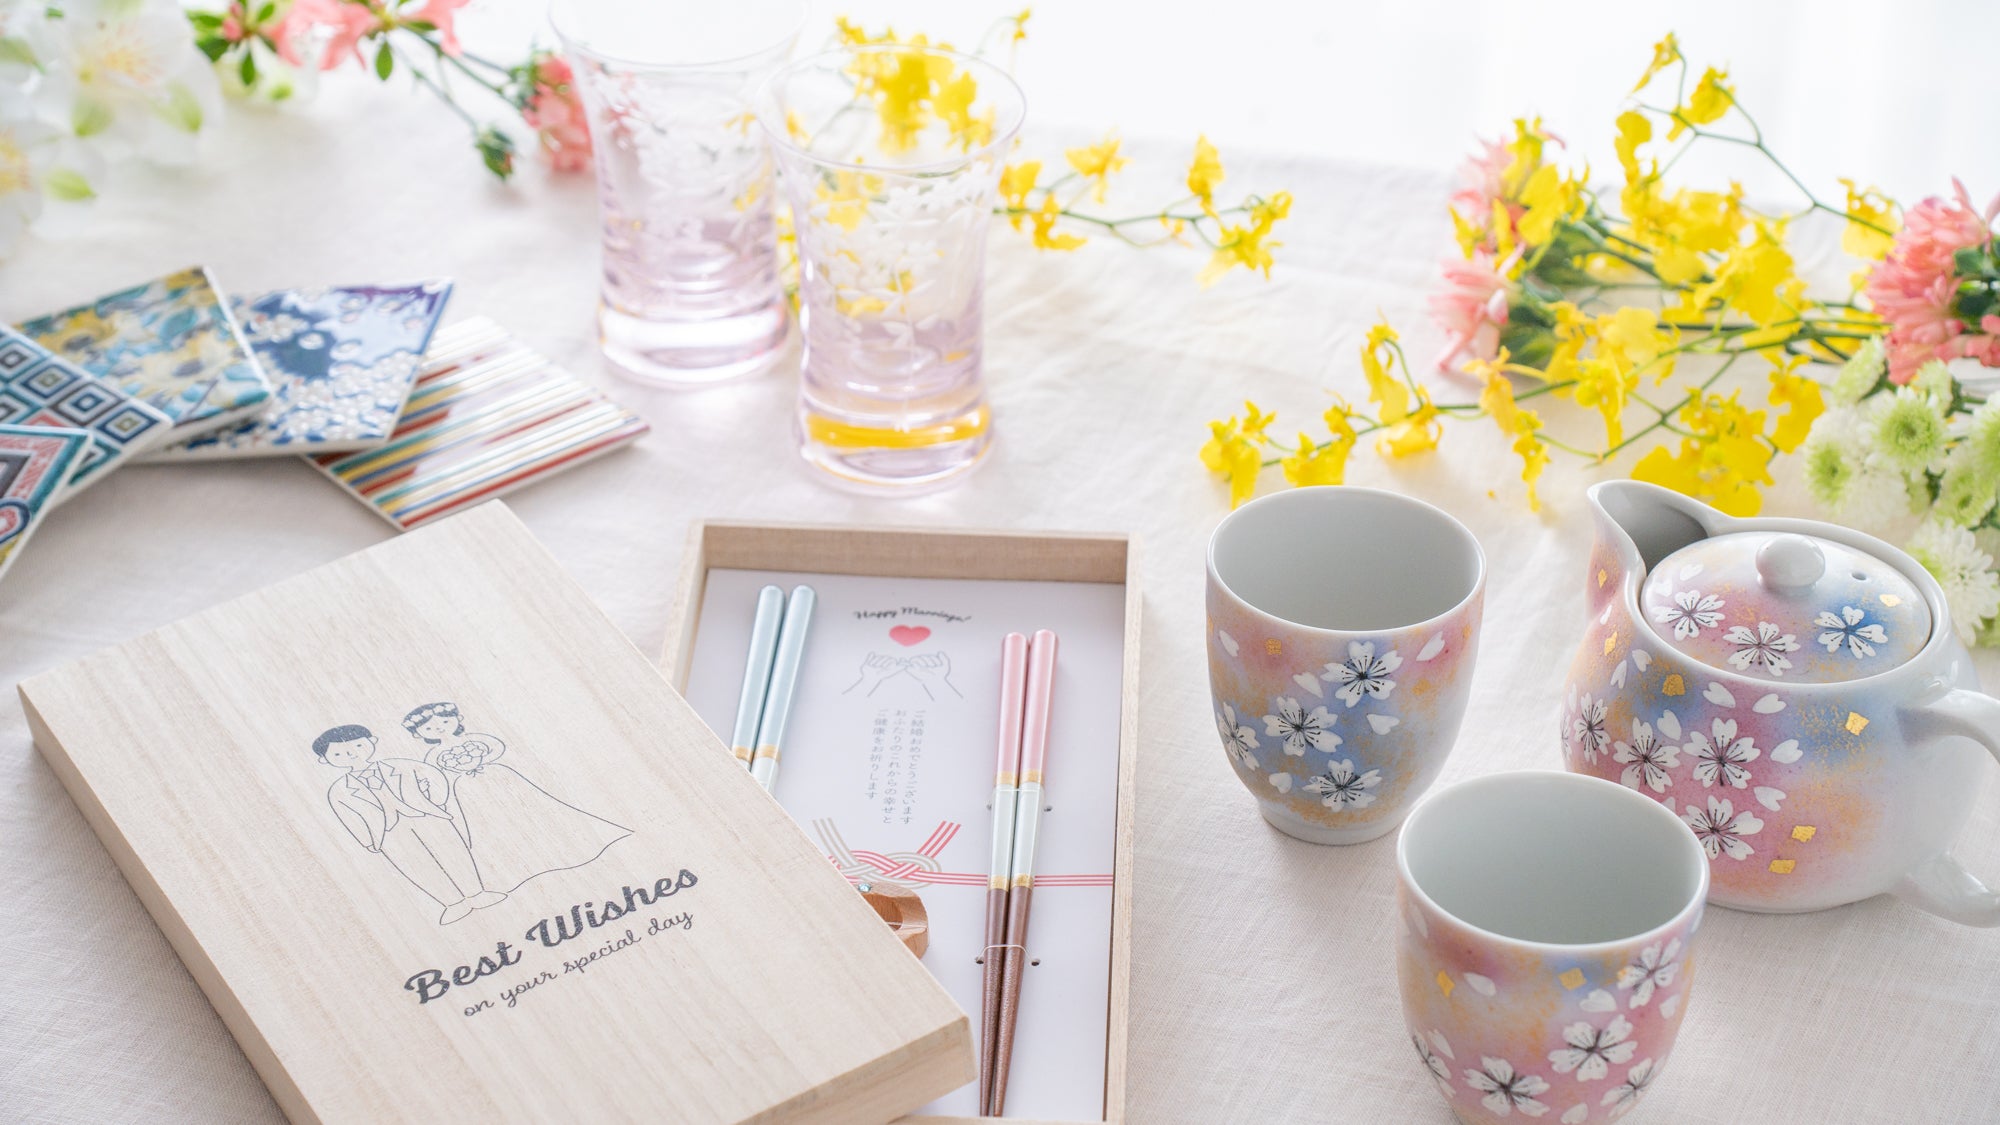 Best Wedding Gifts: 10 Traditional Japanese Items to Delight Every Couple